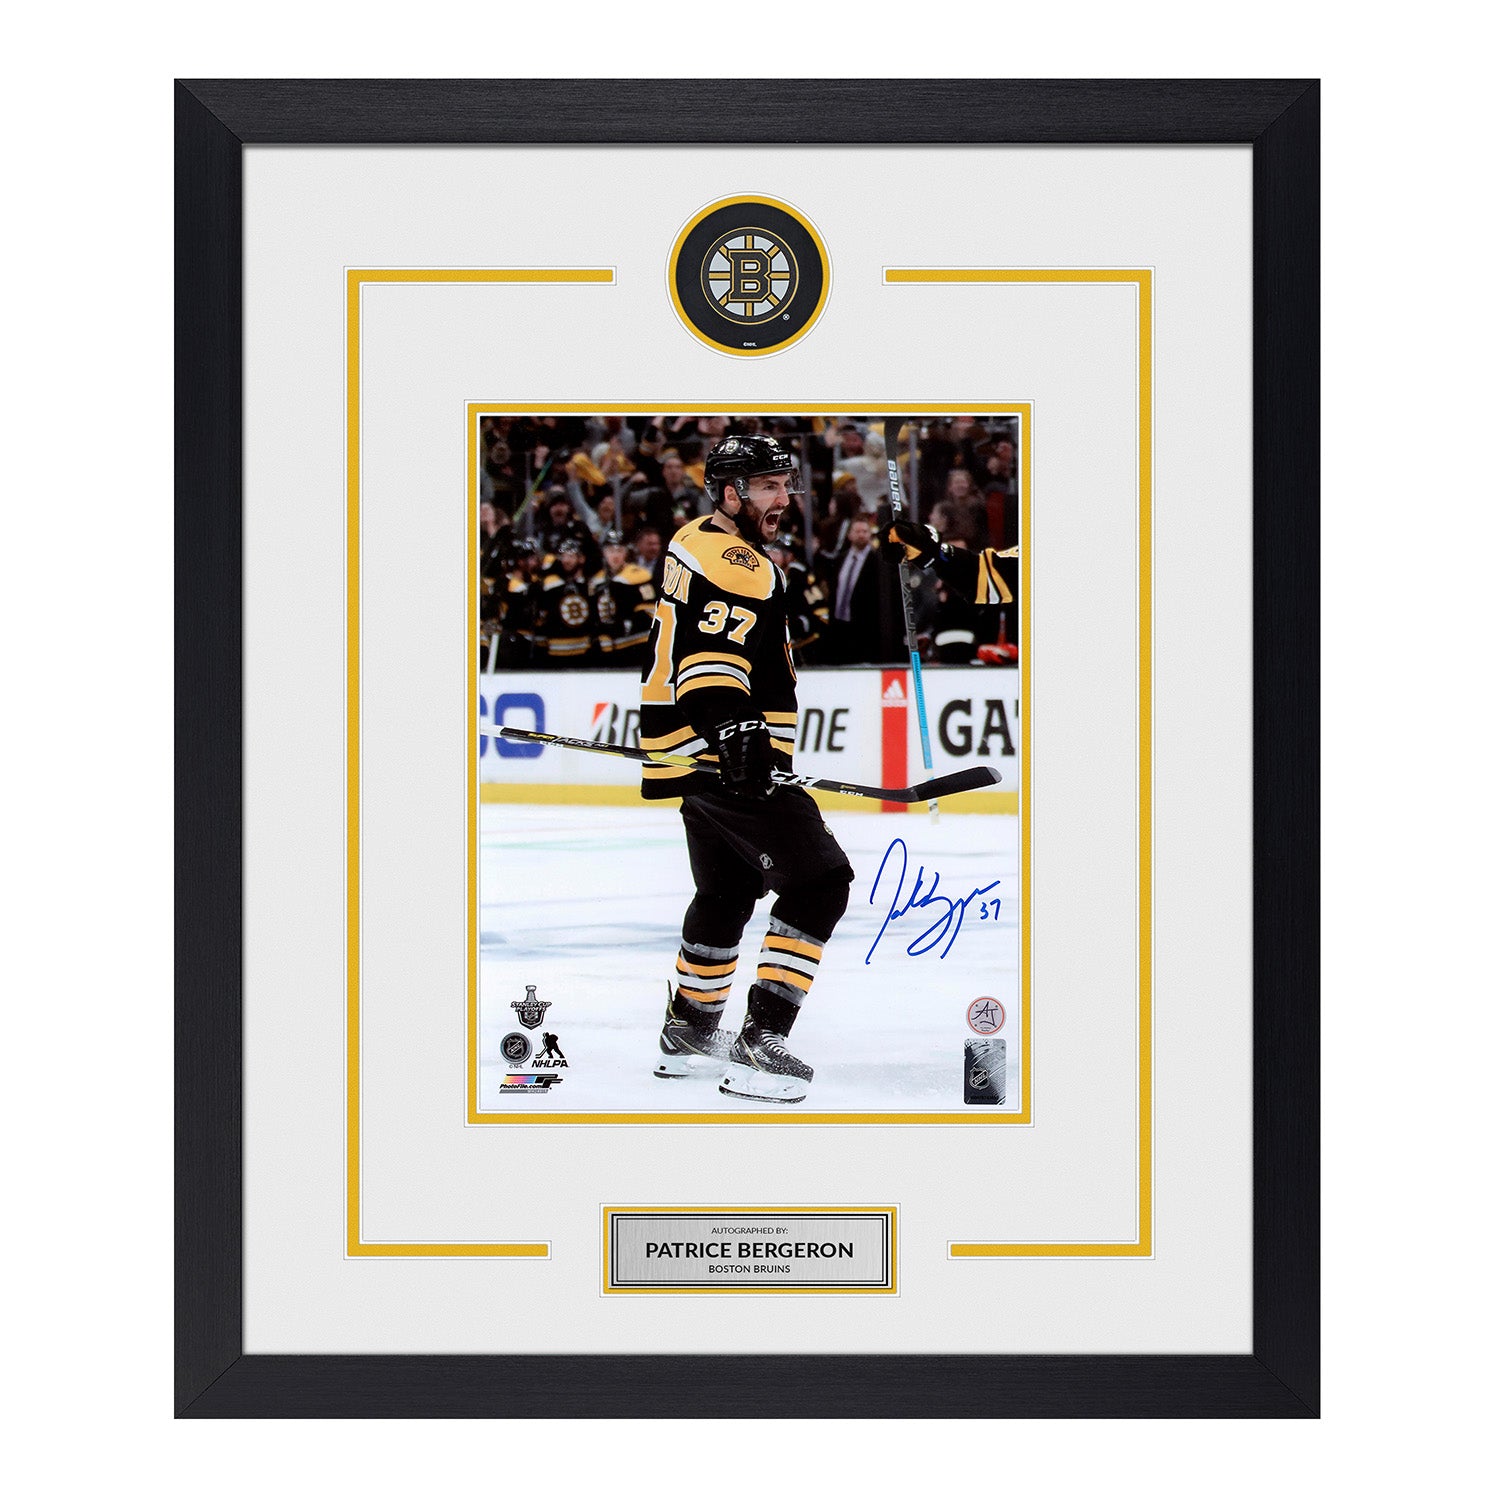 Patrice Bergeron in Action Boston Bruins 8 x 10 Framed Hockey